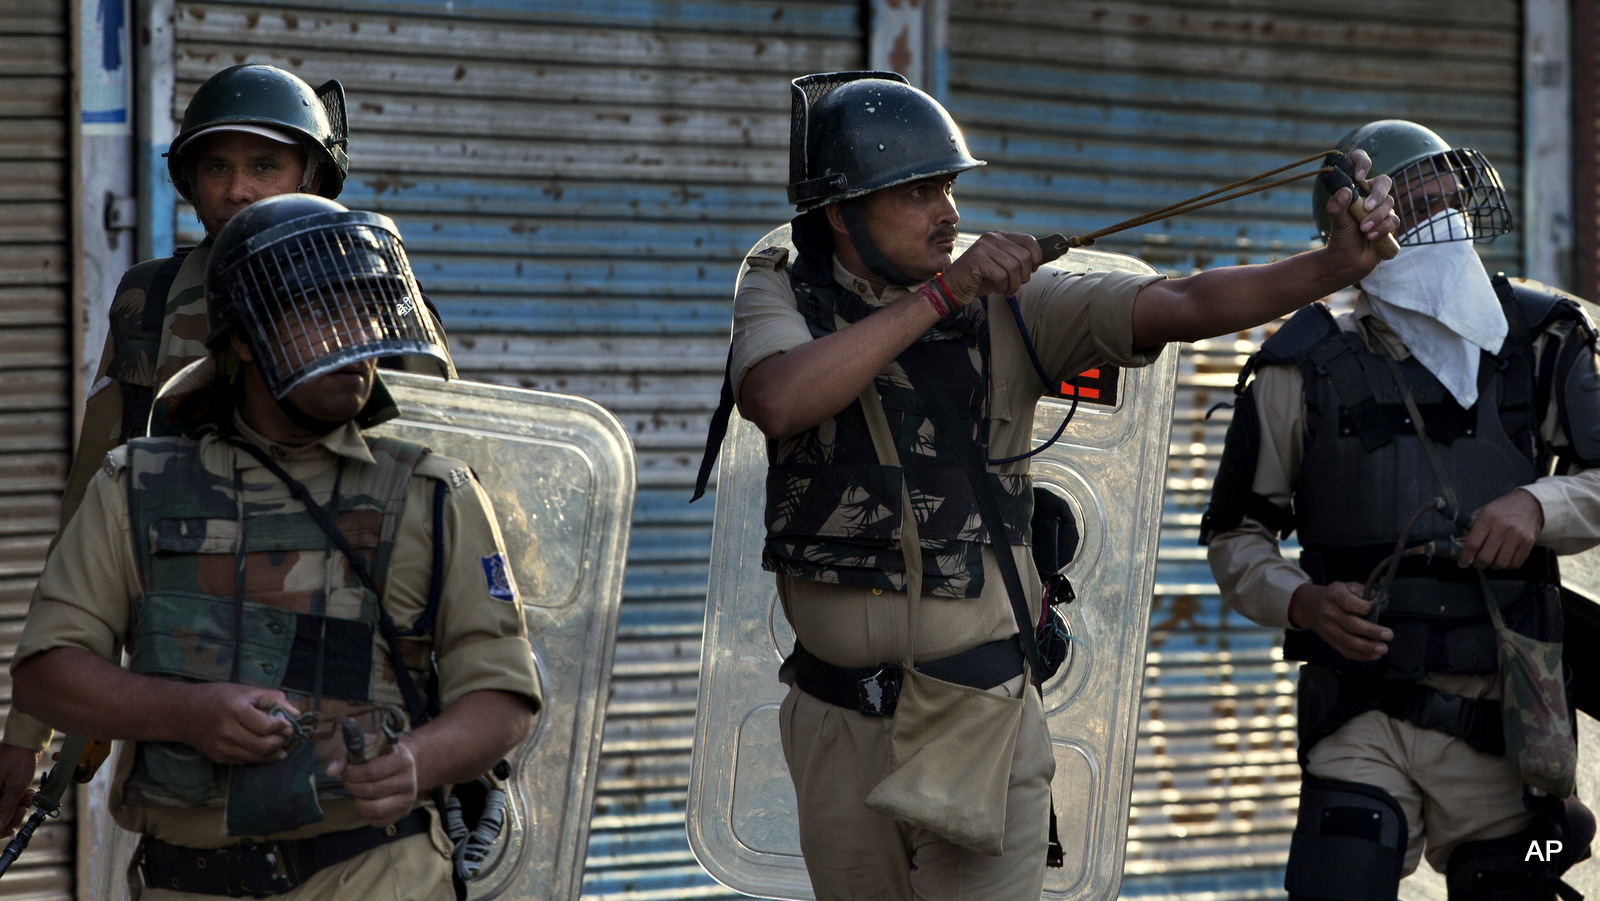 An Indian paramilitary soldier uses a sling to shoot glass marbles at Kashmiri protesters after a day long curfew in Srinagar, Kashmir. Aug. 7, 2016. (AP Photo)